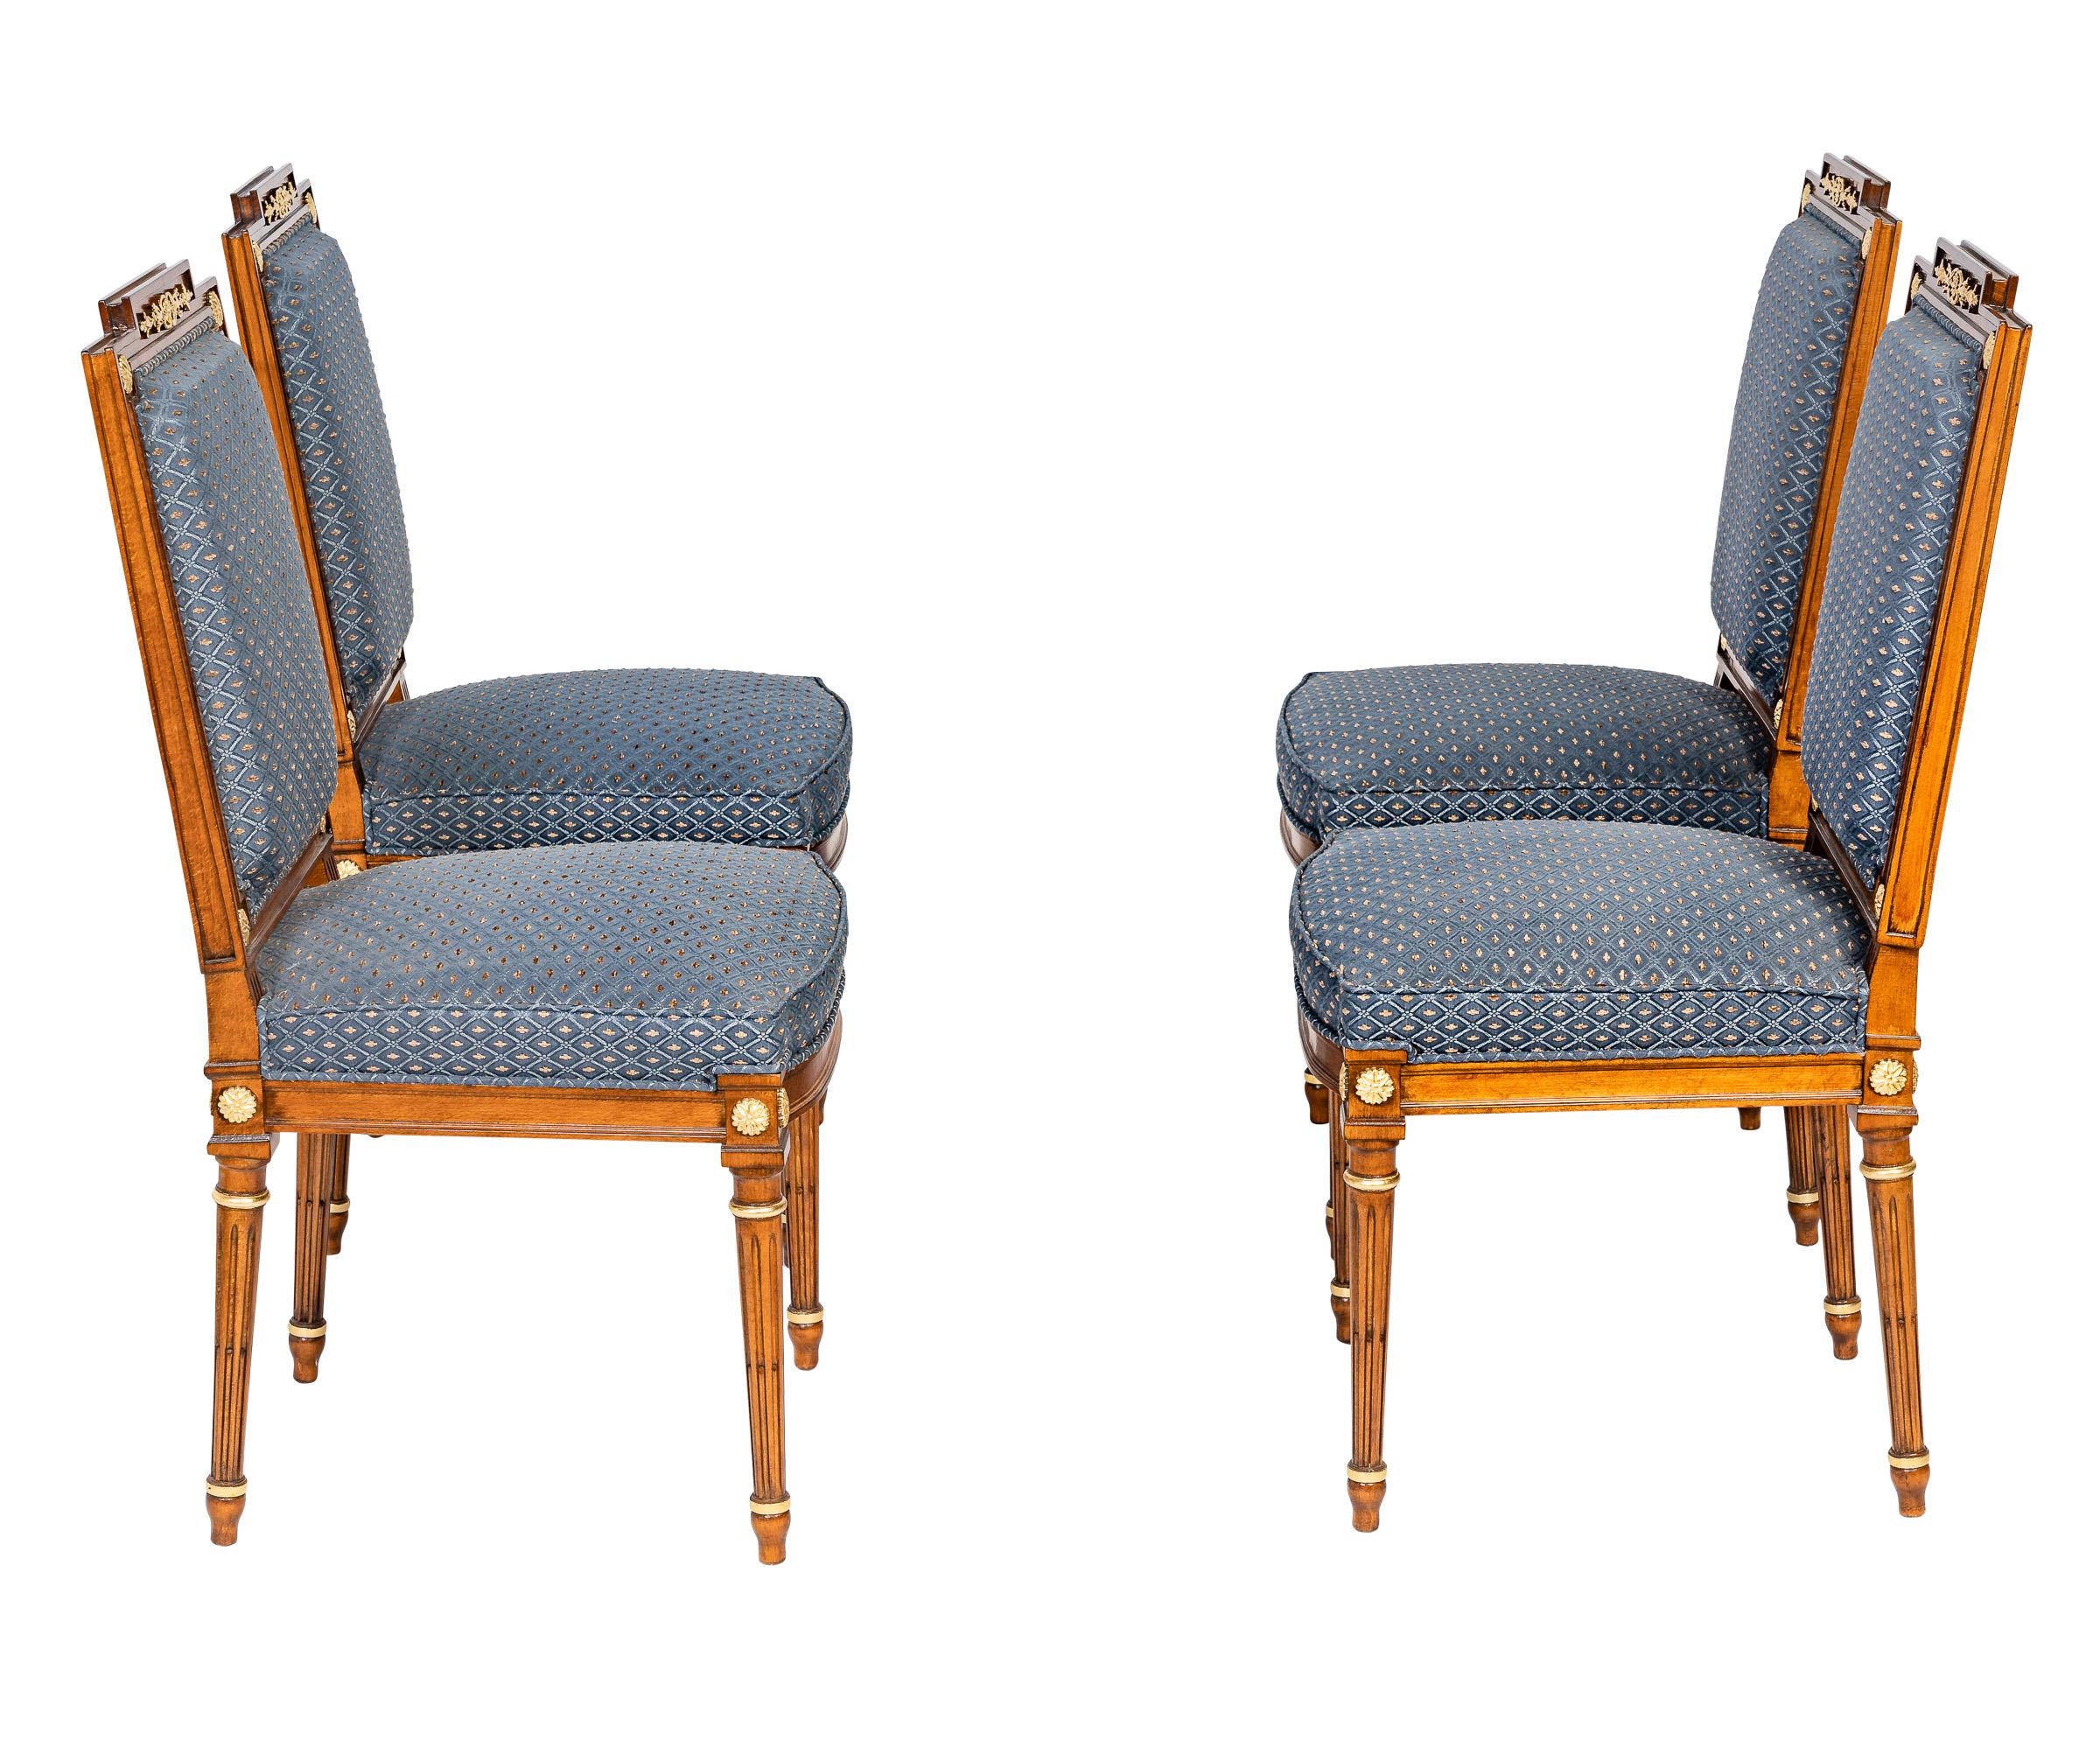 These exquisite French 19th century Louis XVI style dining chairs are handmade and carved in Italy.
The carvings of the armchairs are filigree and decorated with gold ornaments on the front and back. Floral details and an ornament on the top show